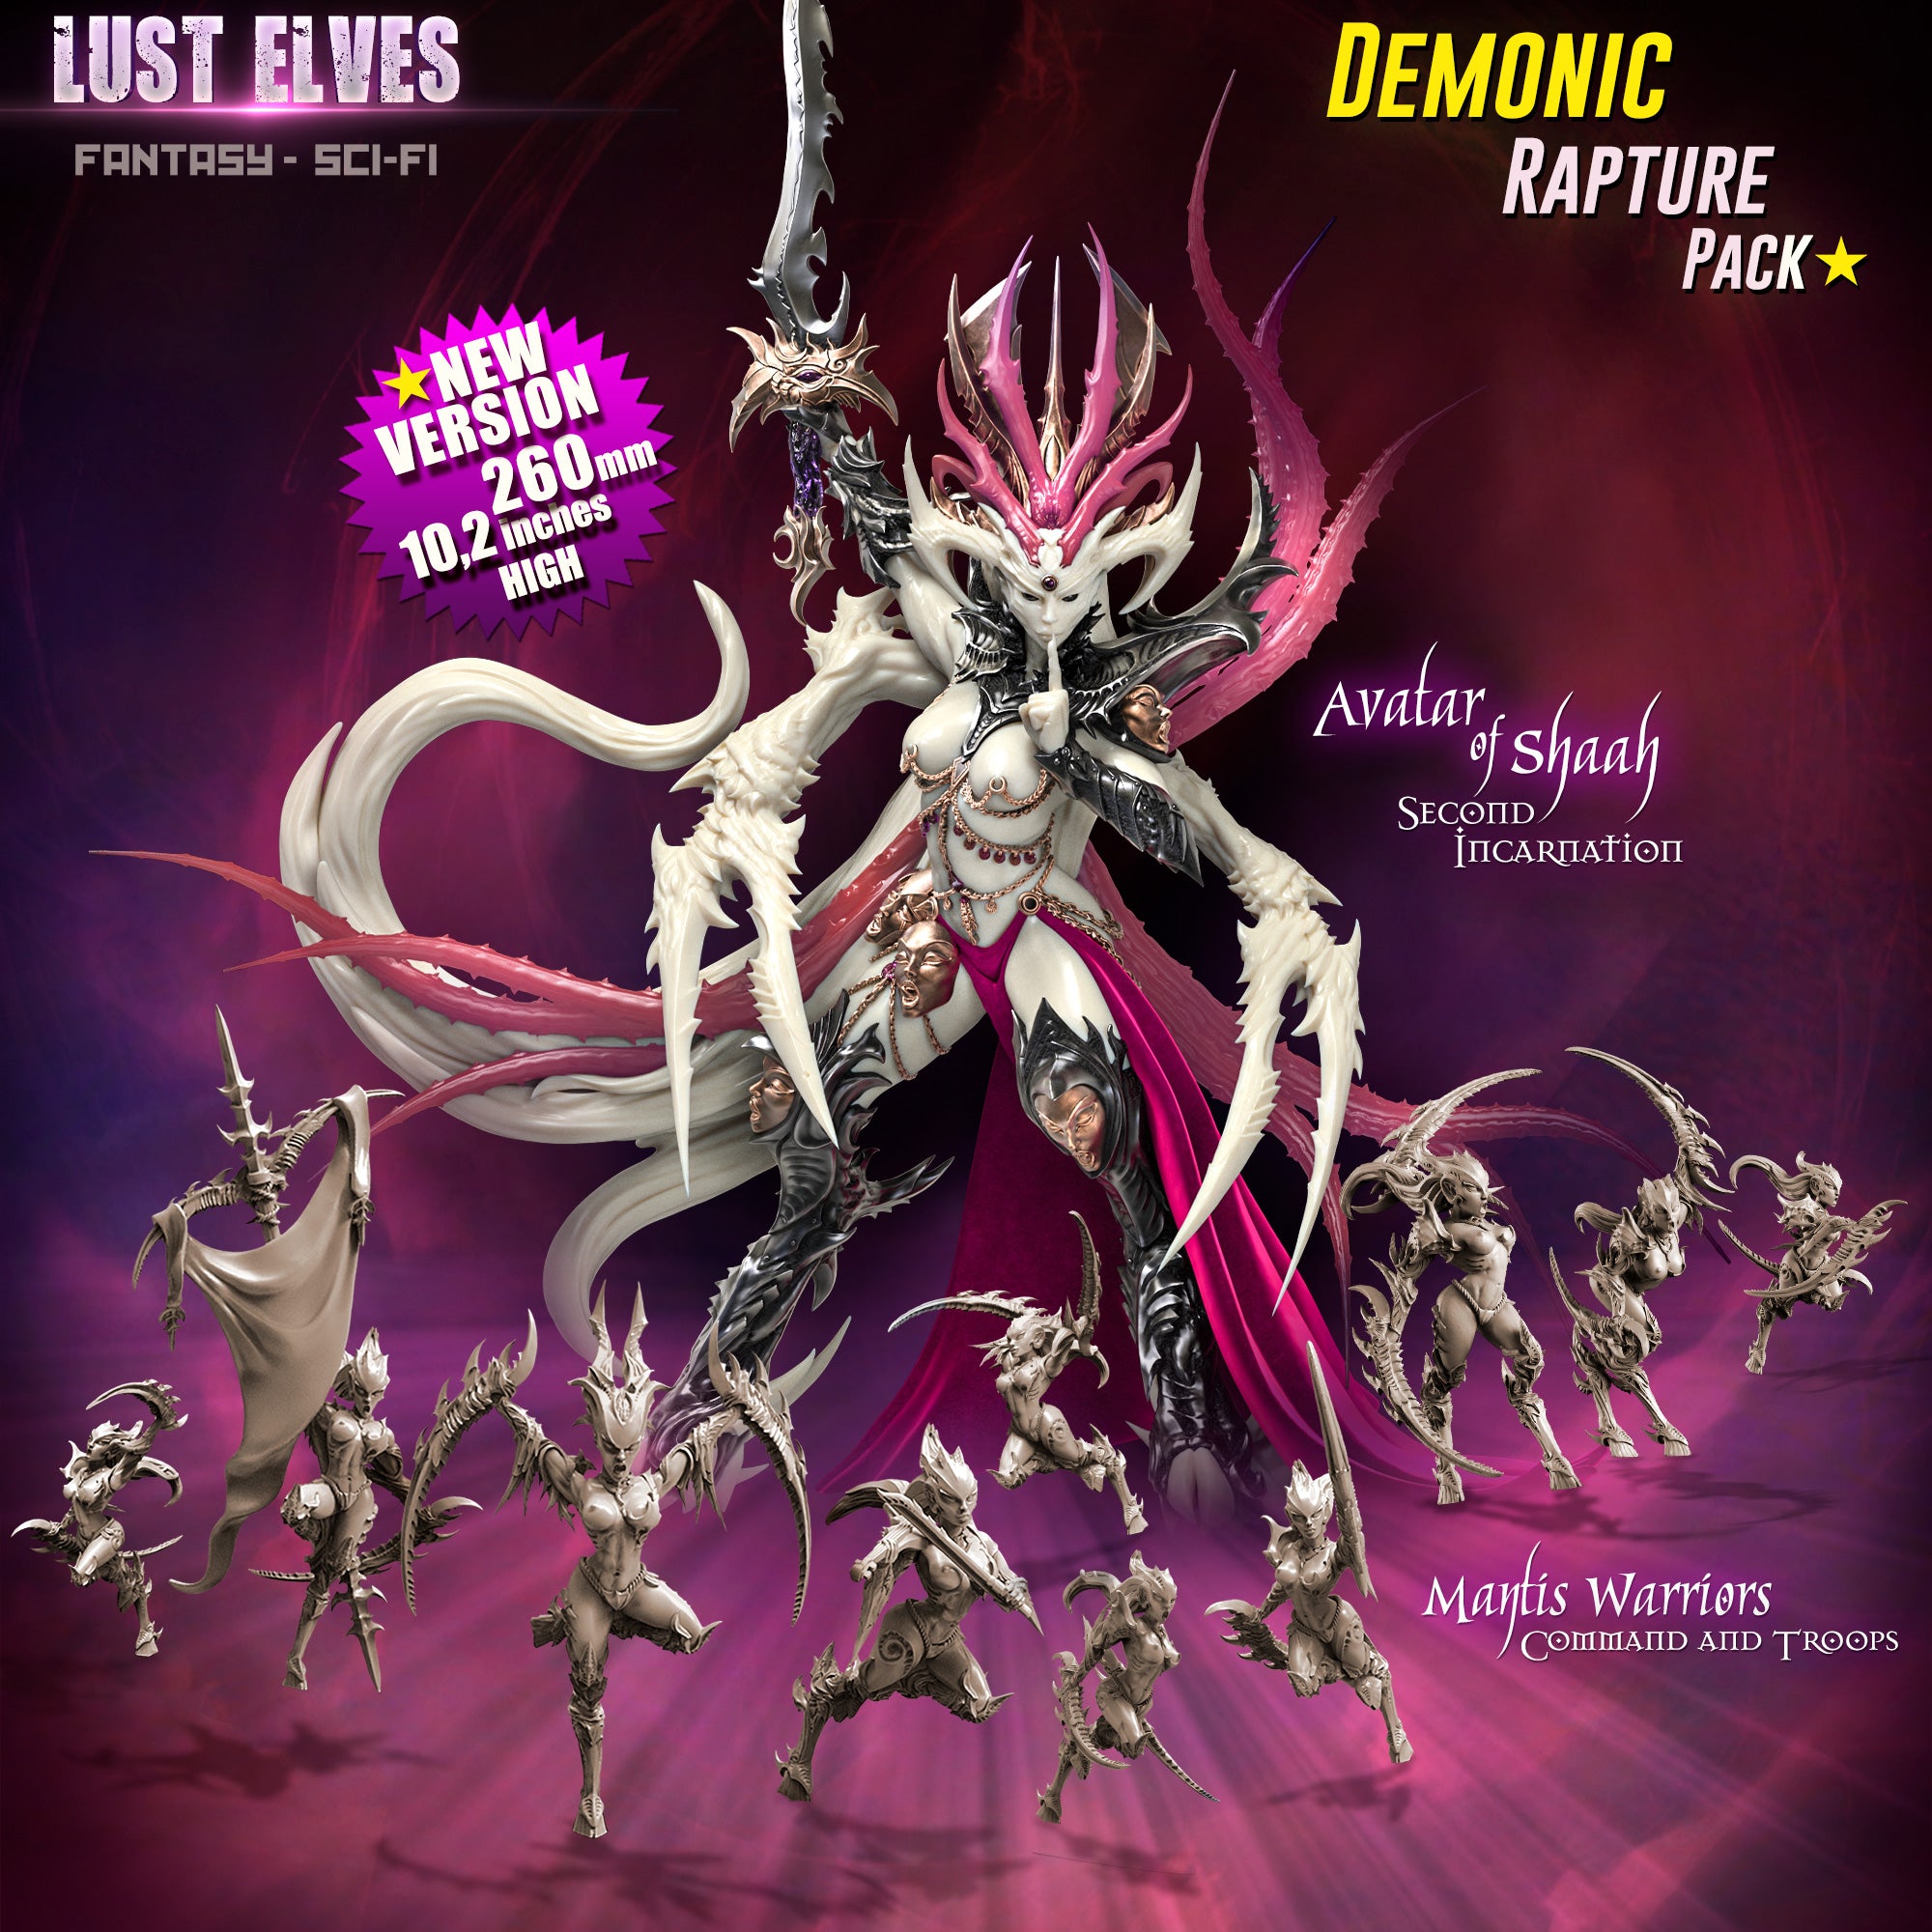 DEMONIC Rapture Pack (LE - F/SF) (incl. Avatar of Shaah)